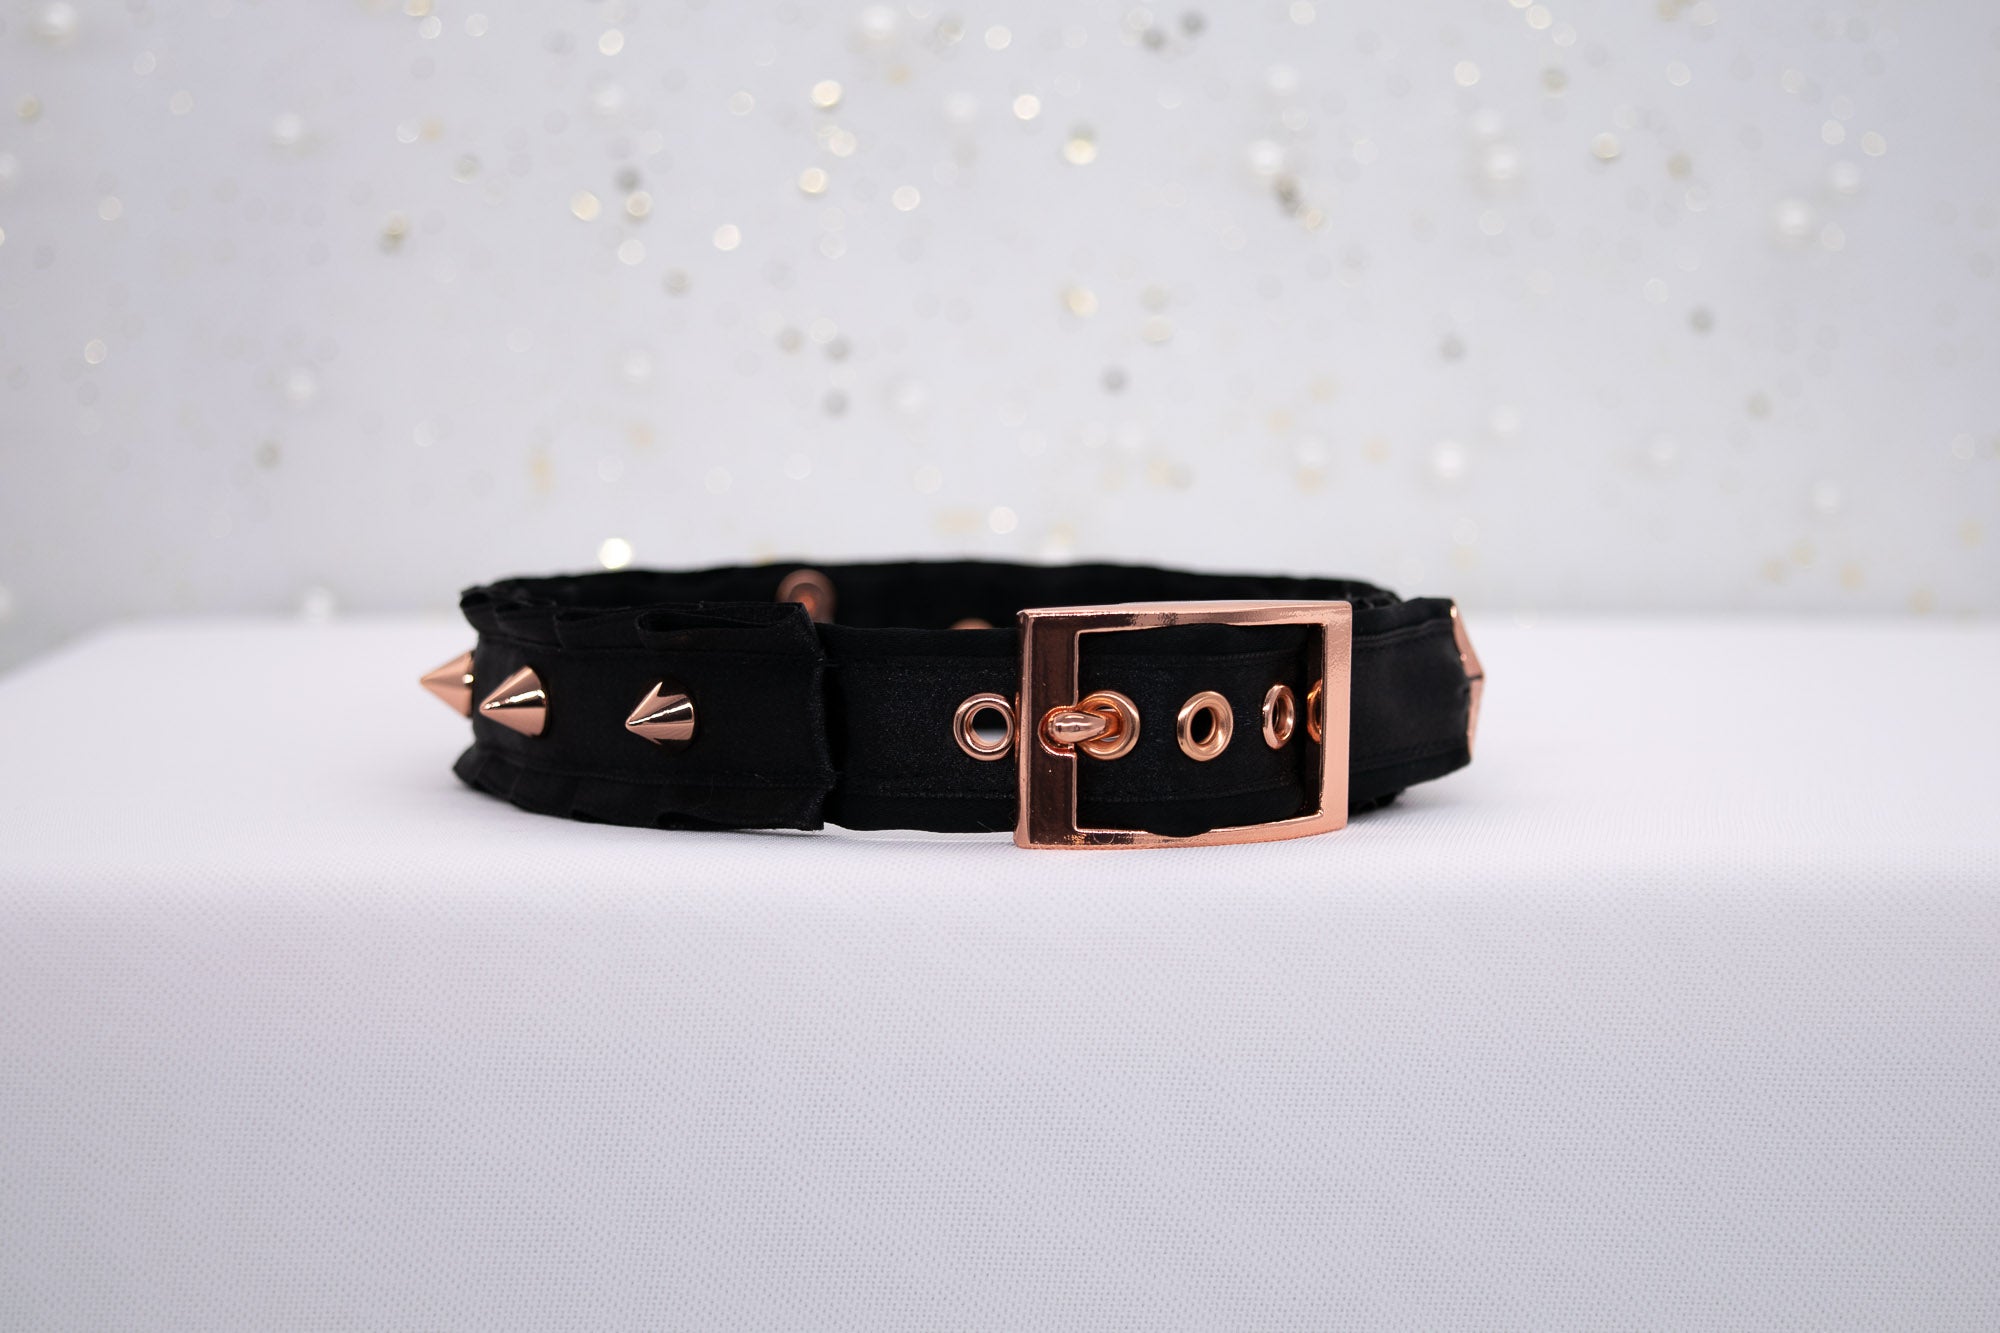 'Angel's Heart' - Black Spiked BDSM Collar in Rose Gold